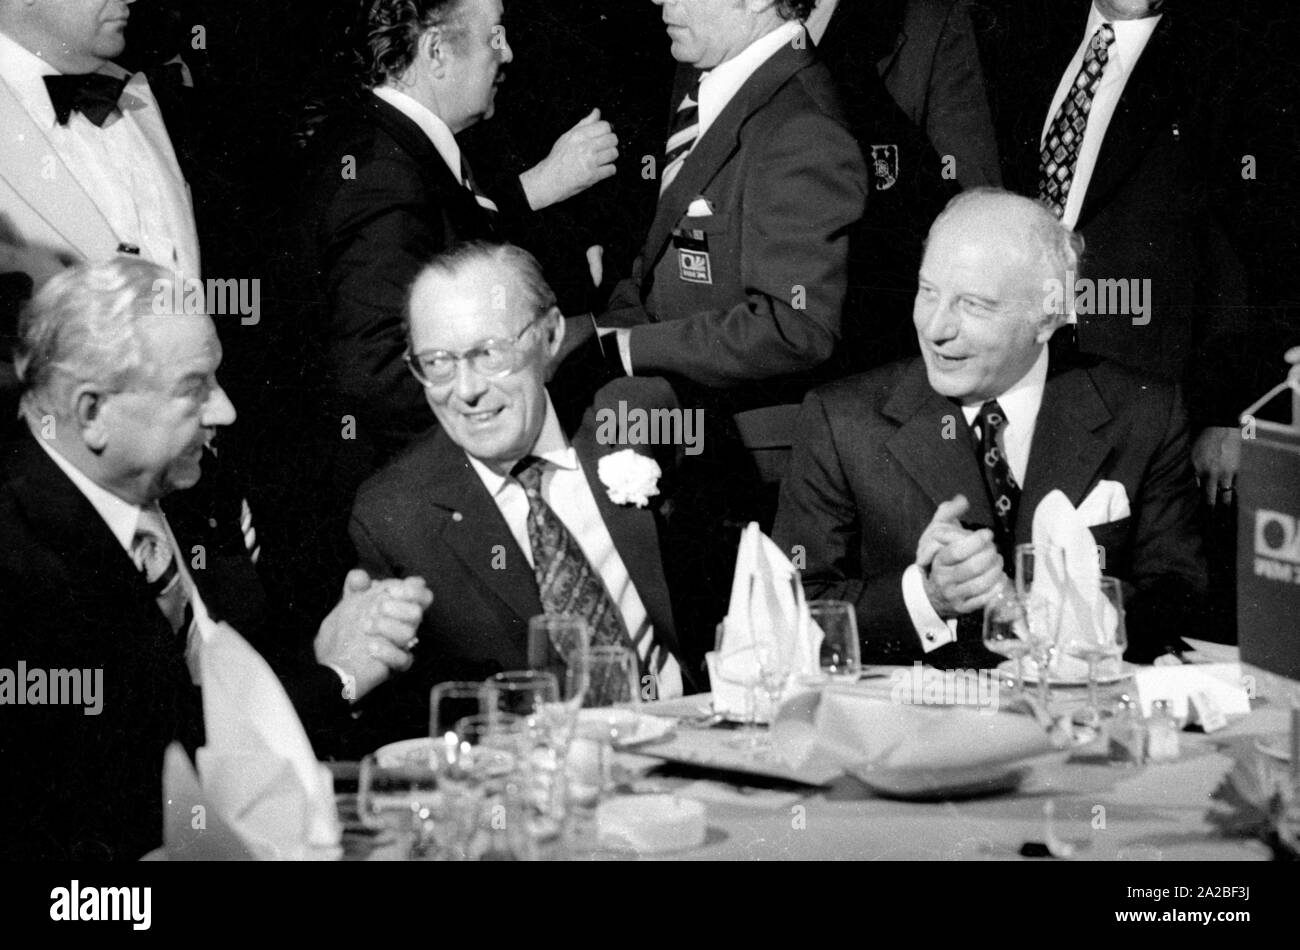 The Bavarian Prime Minister Alfons Goppel (l.), the Dutch Prince Bernhard zur Lippe-Biestfeld (center) and Federal President Walter Scheel (r.) at the banquet in the Hilton Hotel in Munich. Stock Photo